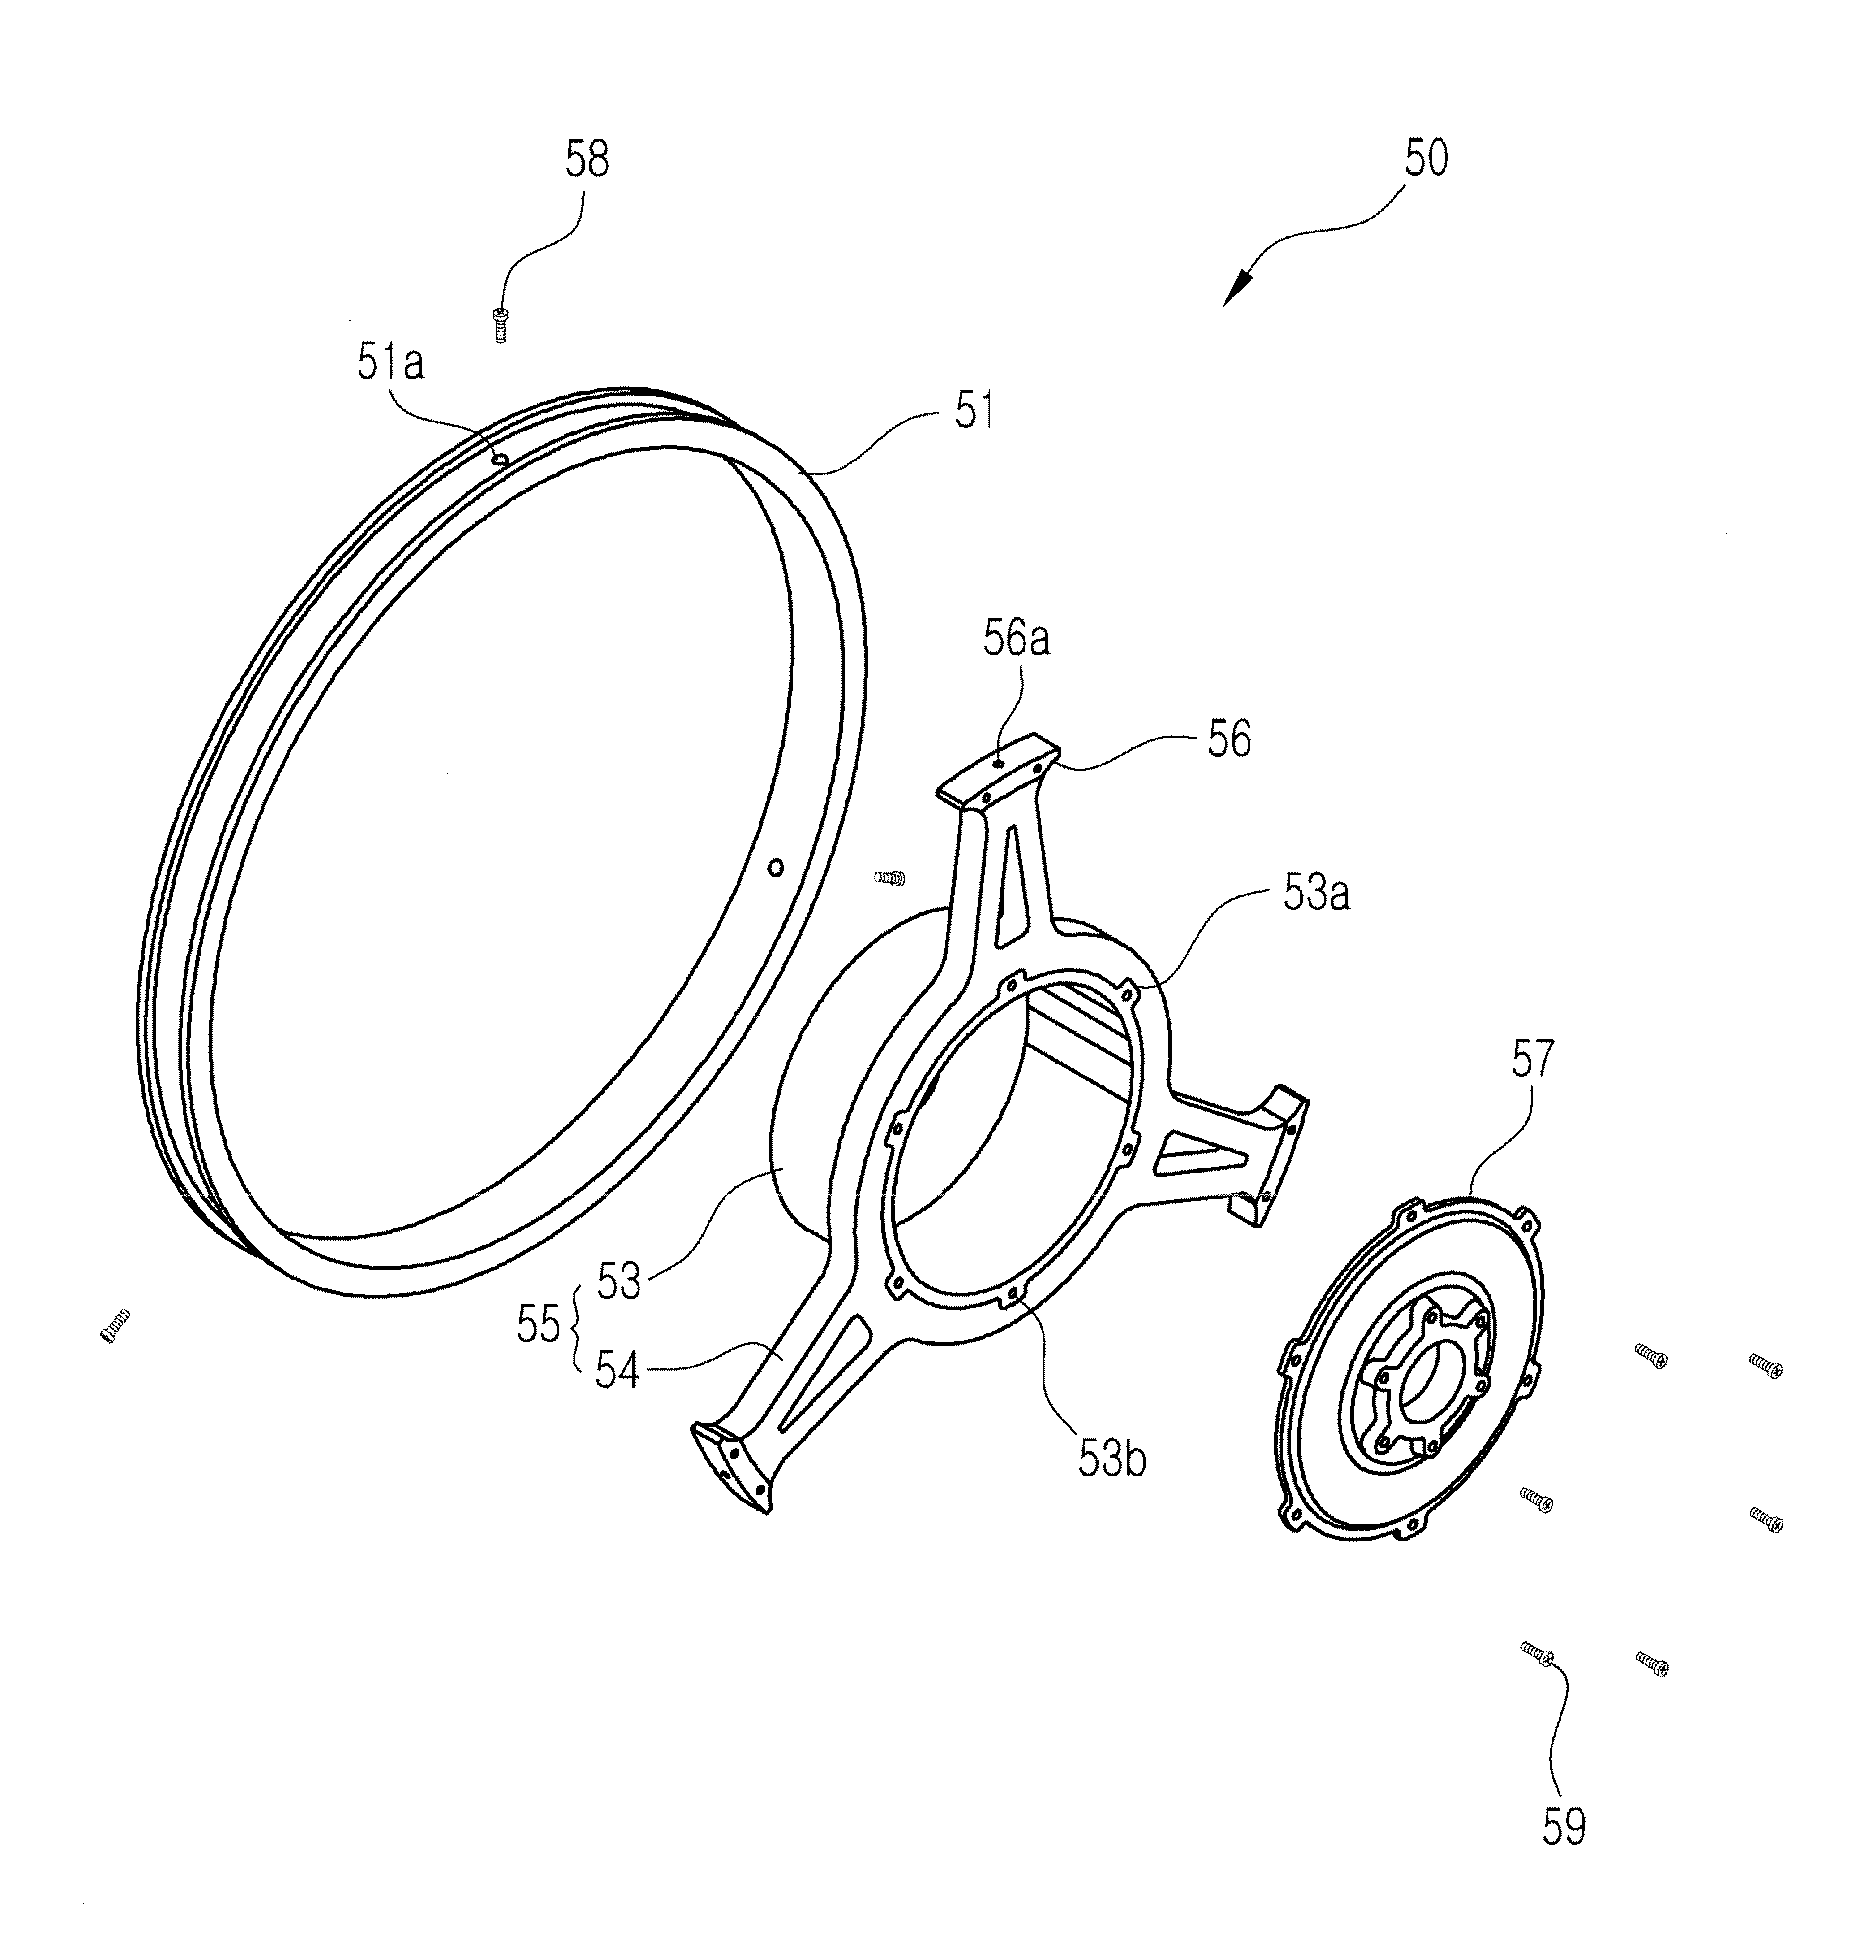 Motor housing integrated-type spoke for electric bicycle, manufacturing method thereof, wheel assembly having the same and manufacturing method thereof